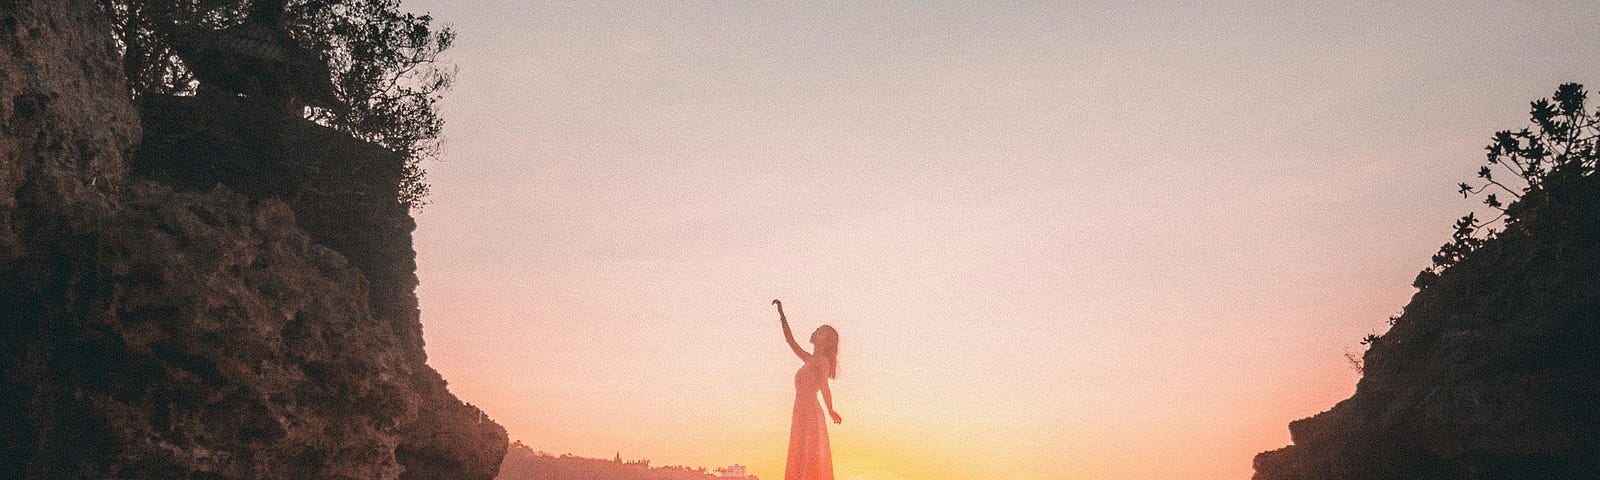 Woman standing on a rock platform on the beach with a sunset behind her